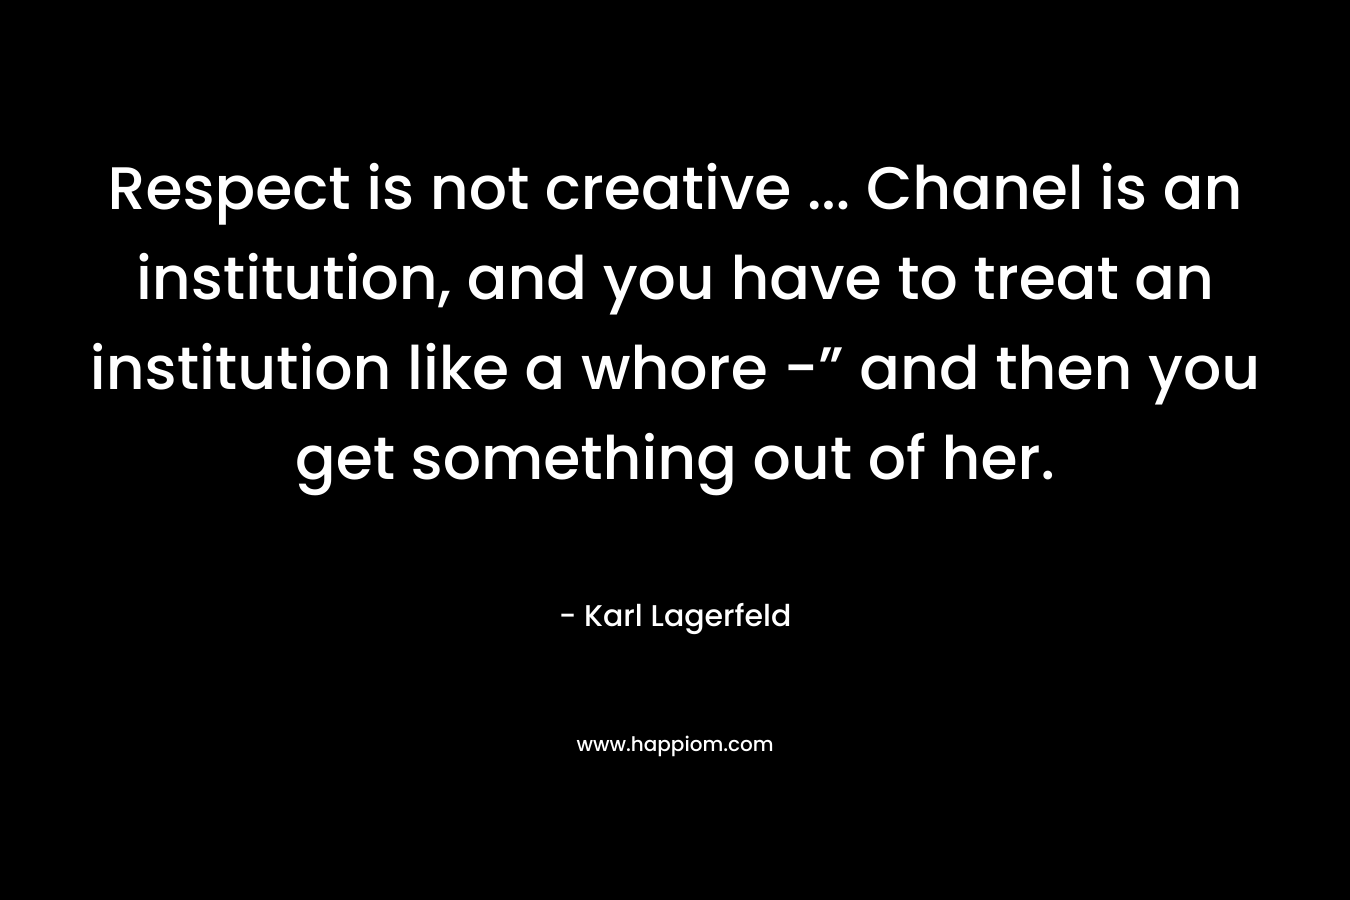 Respect is not creative ... Chanel is an institution, and you have to treat an institution like a whore -” and then you get something out of her.